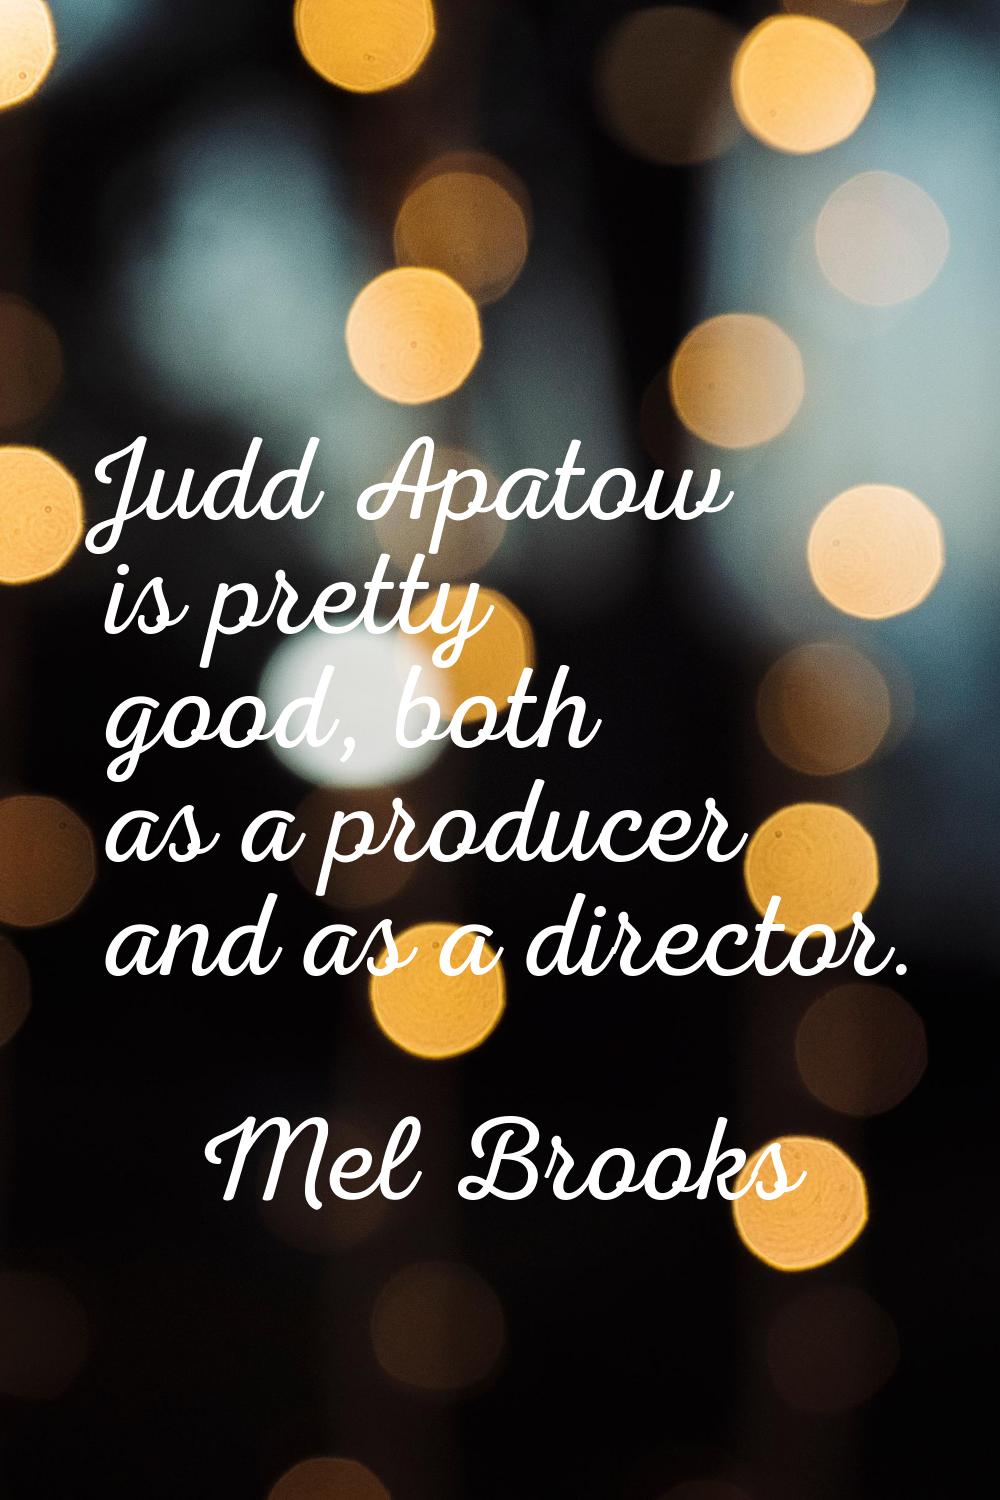 Judd Apatow is pretty good, both as a producer and as a director.